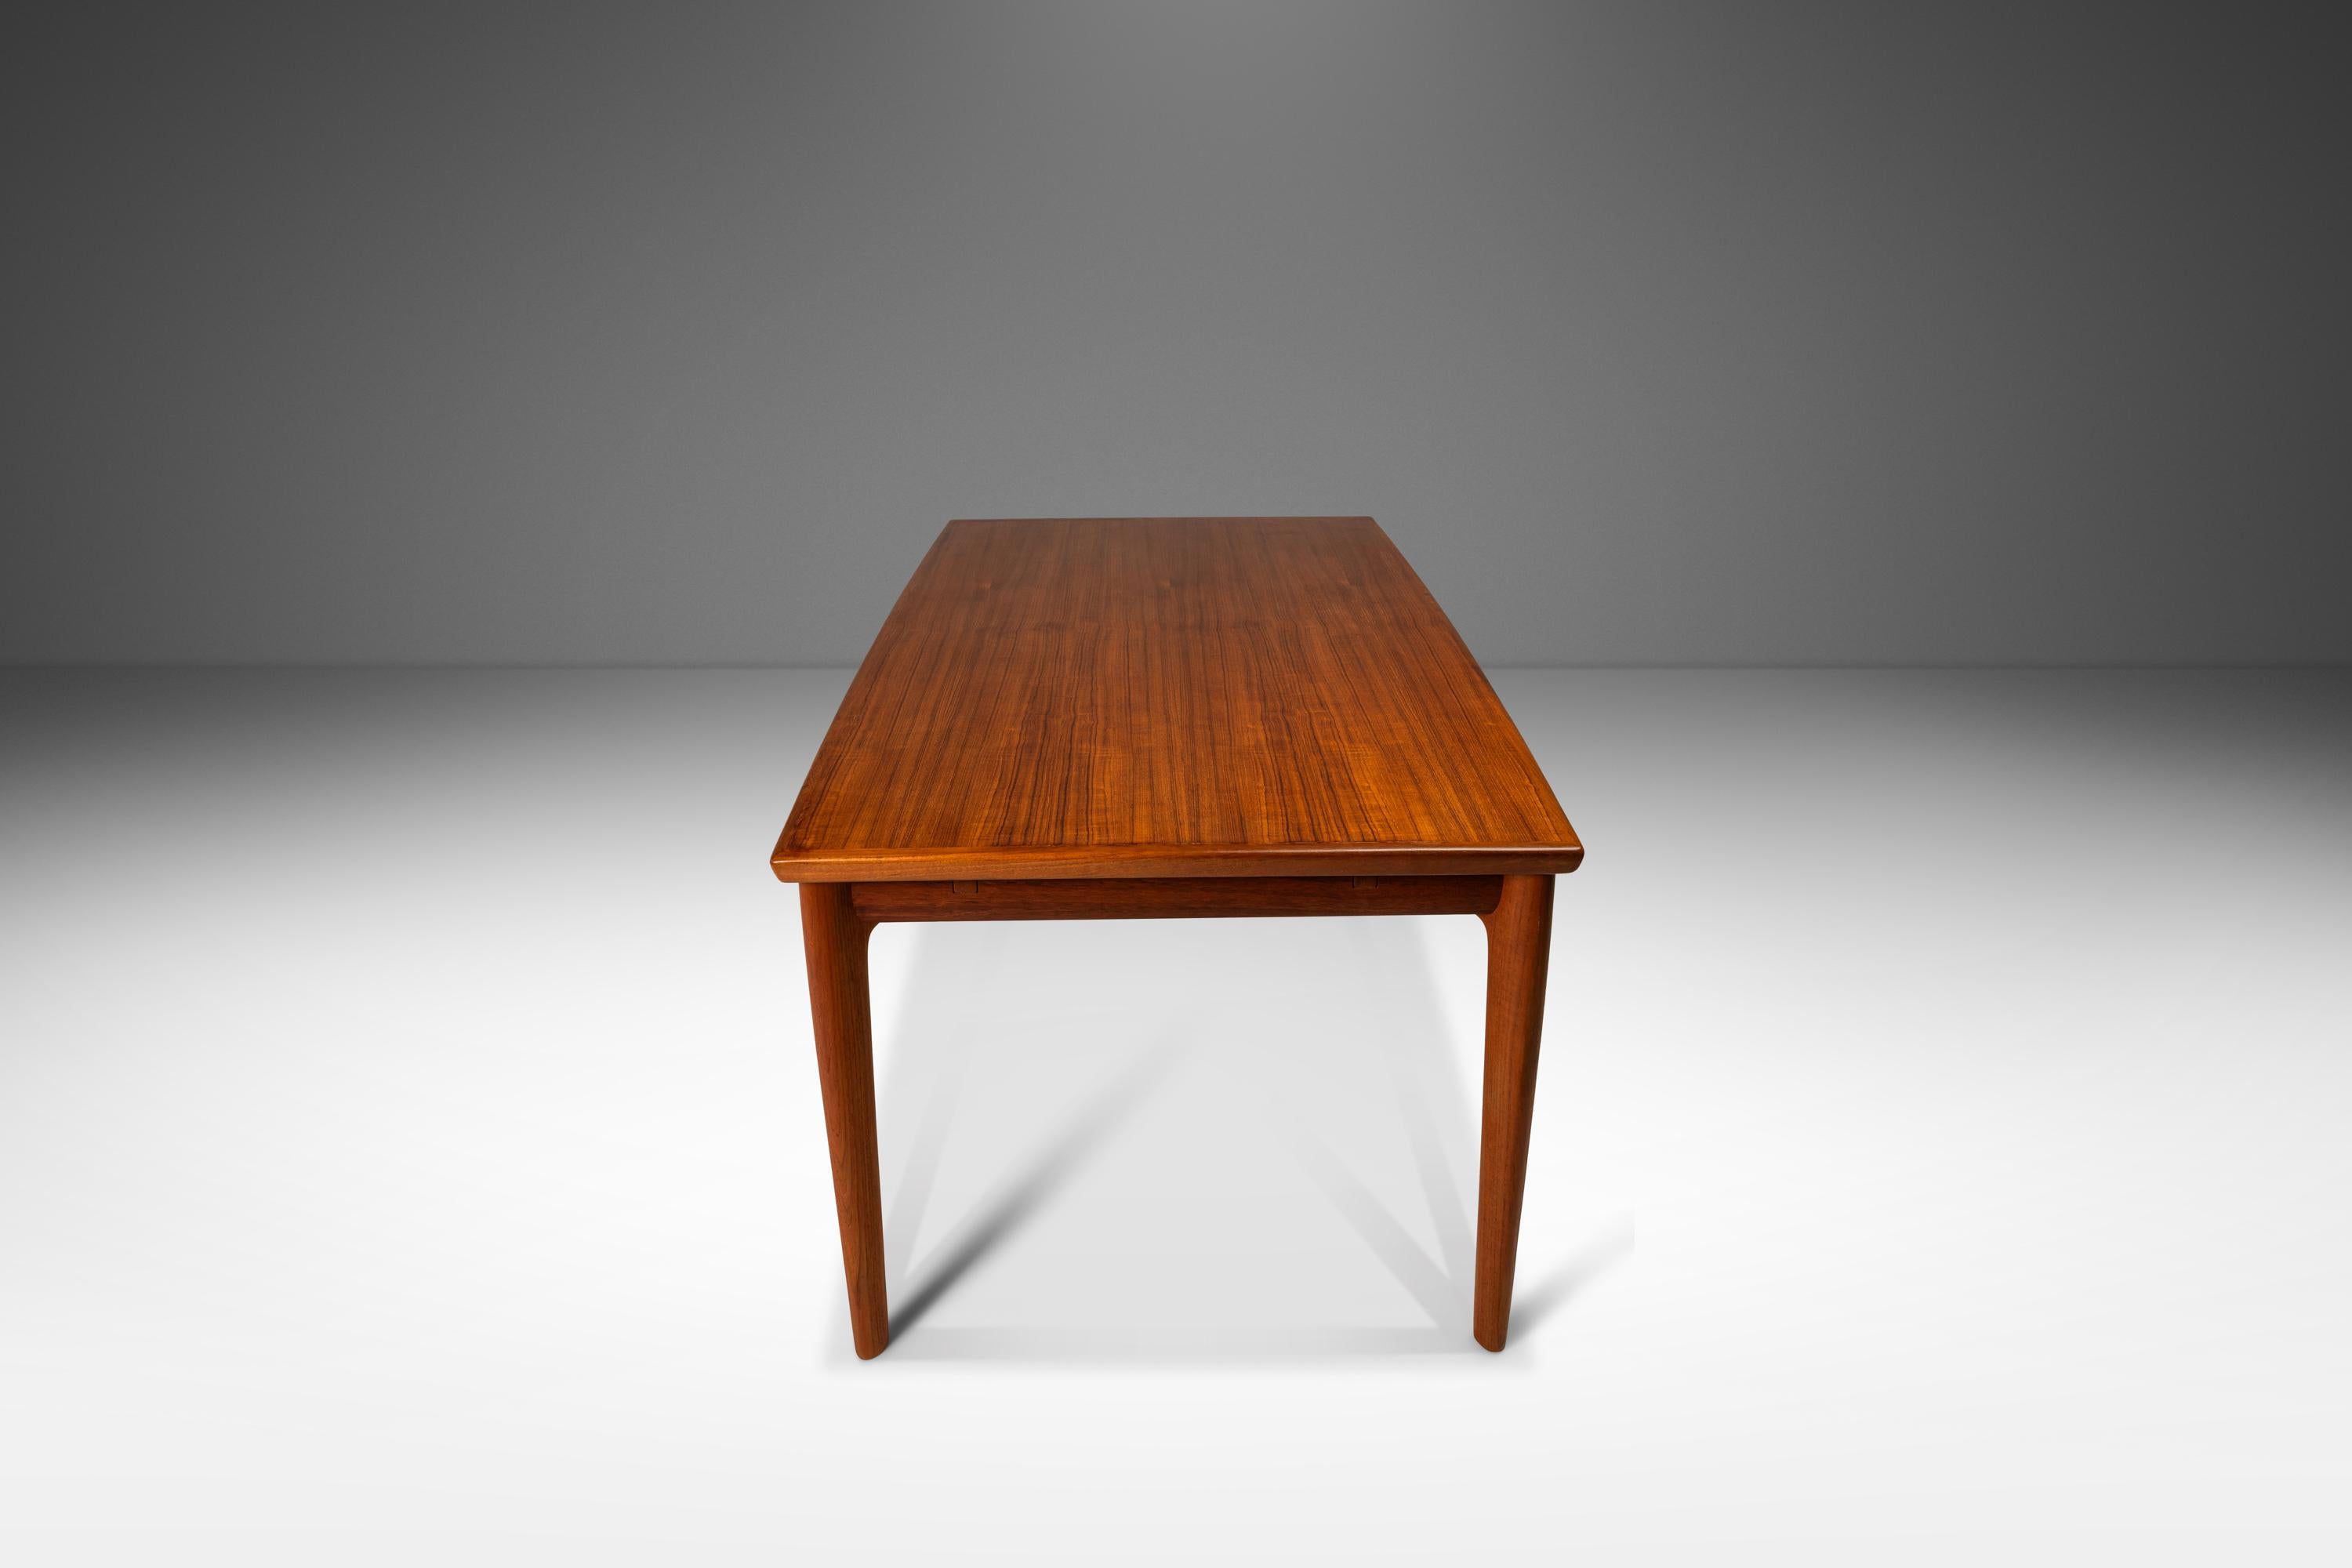 Danish Modern Expansion Dining Table in Teak w/ Stow-in-Table Leaves, c. 1960s In Good Condition For Sale In Deland, FL